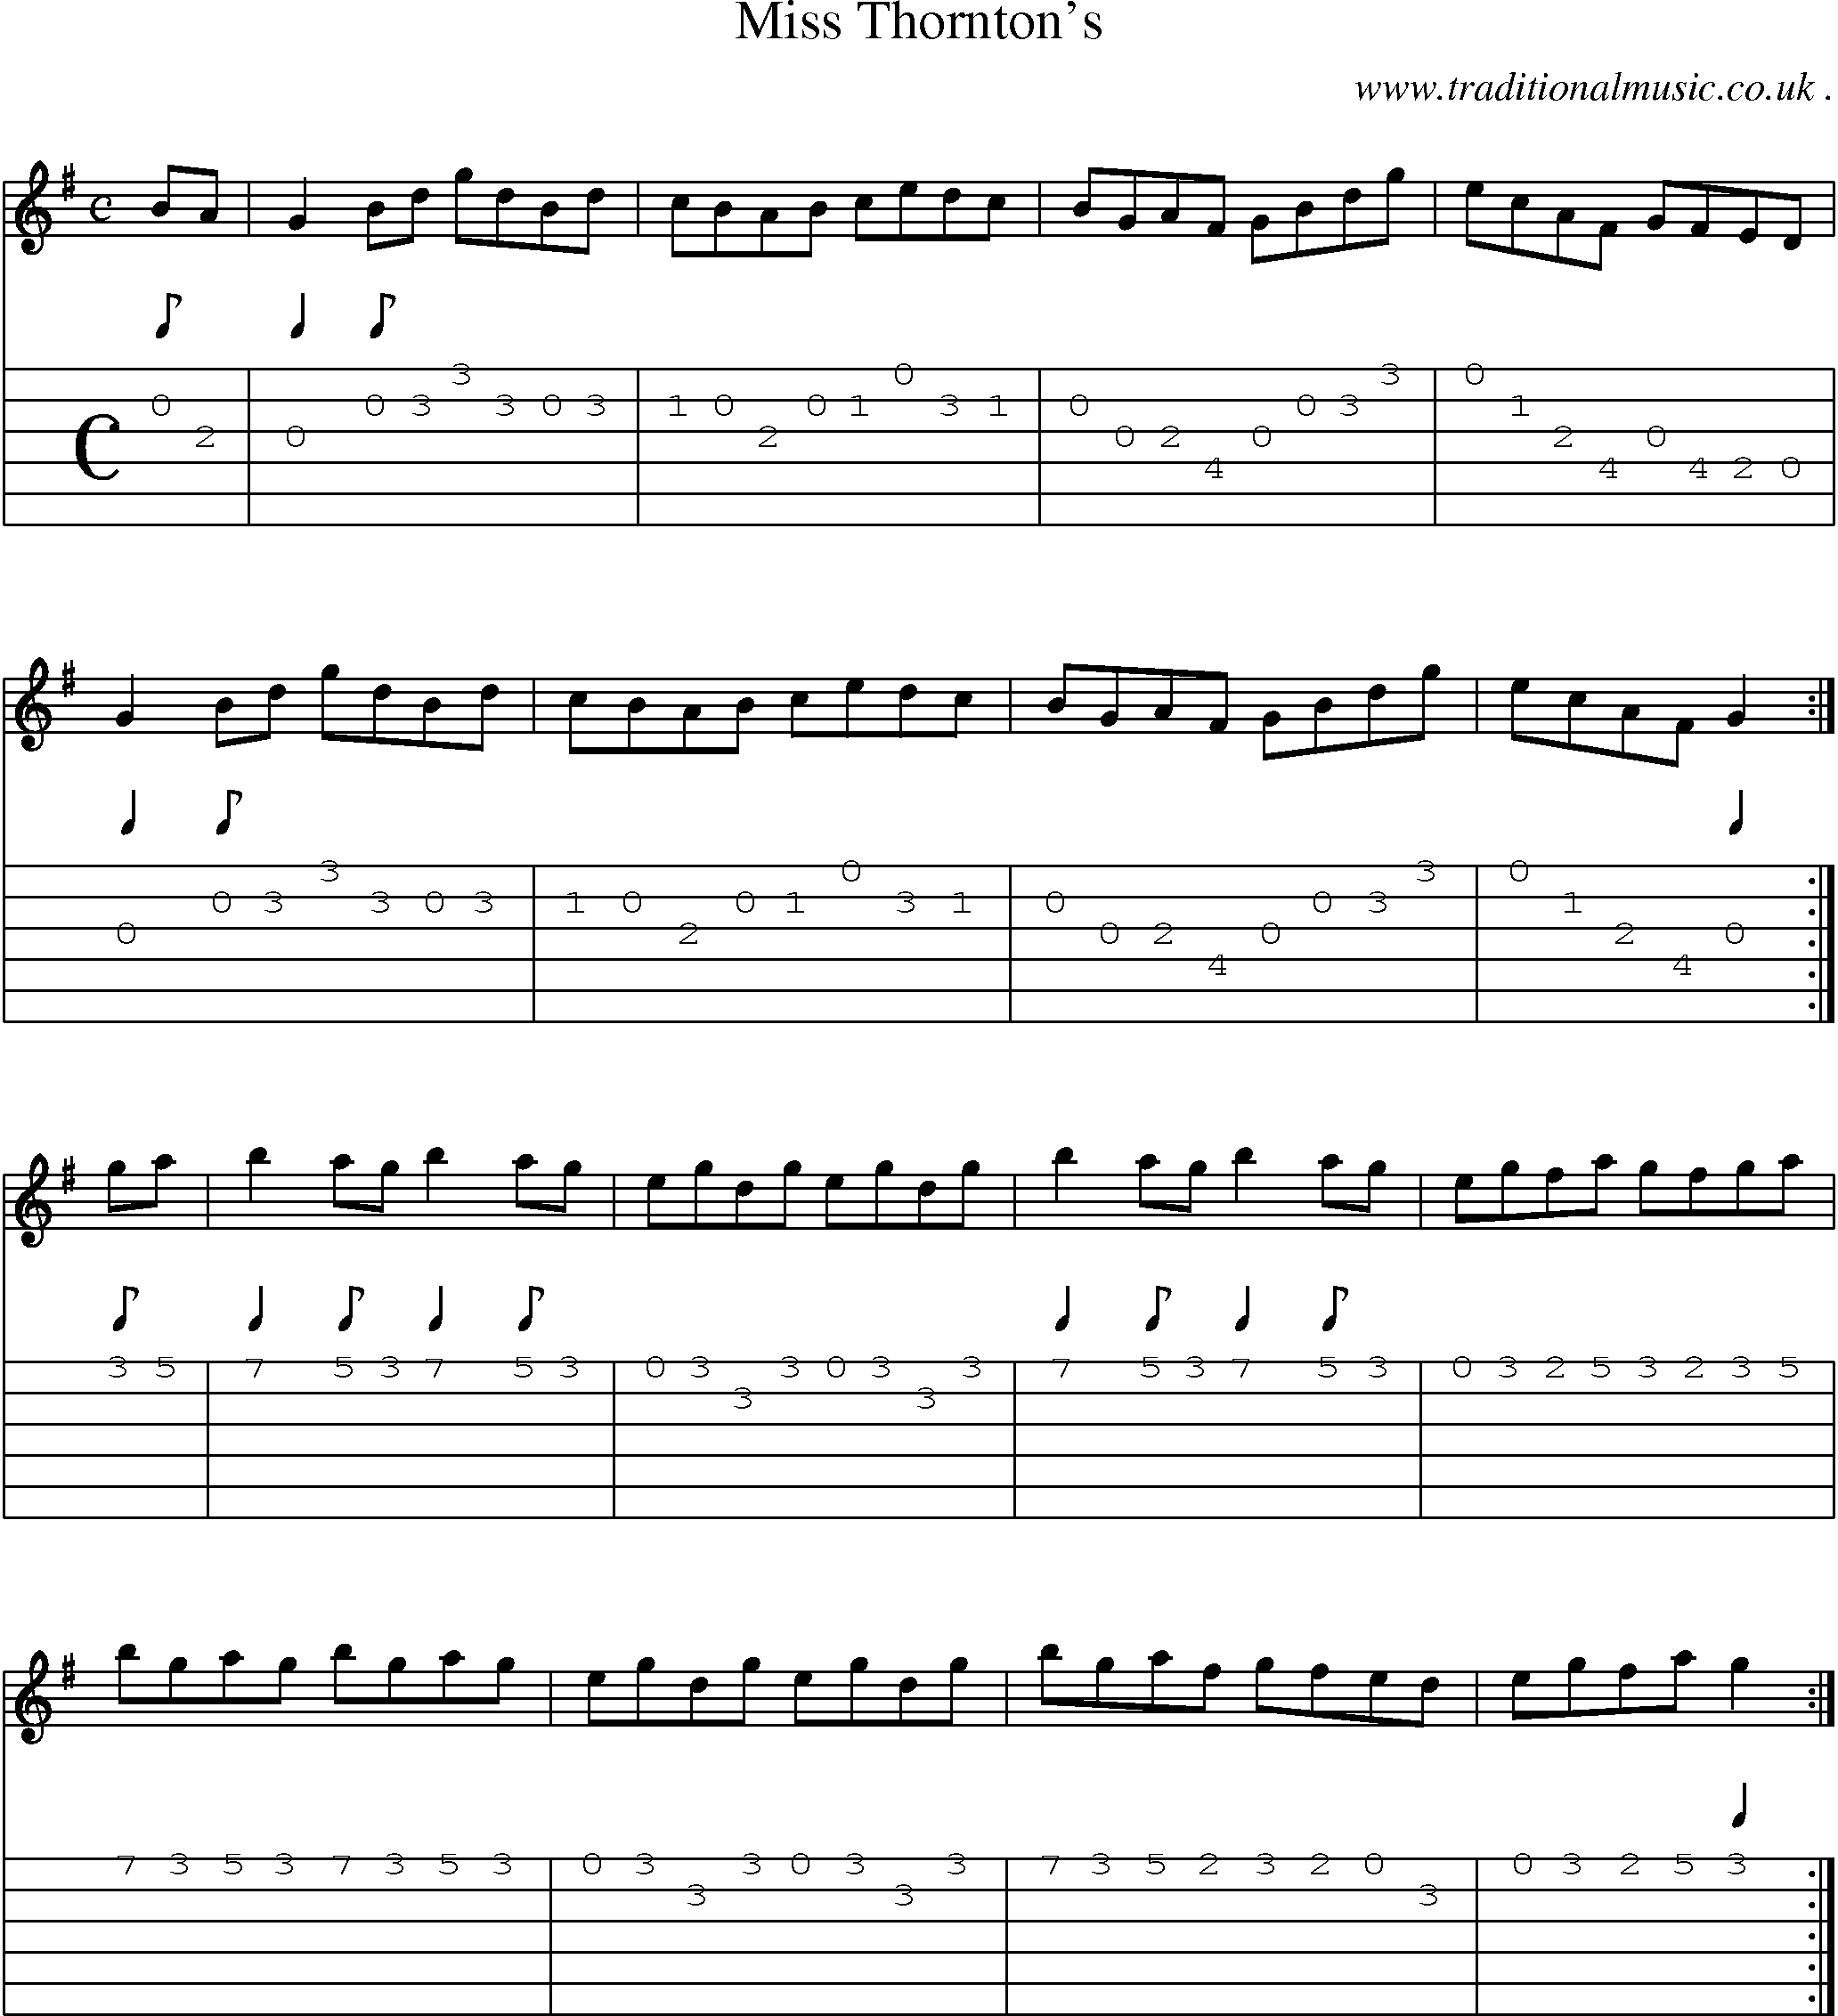 Sheet-Music and Guitar Tabs for Miss Thorntons